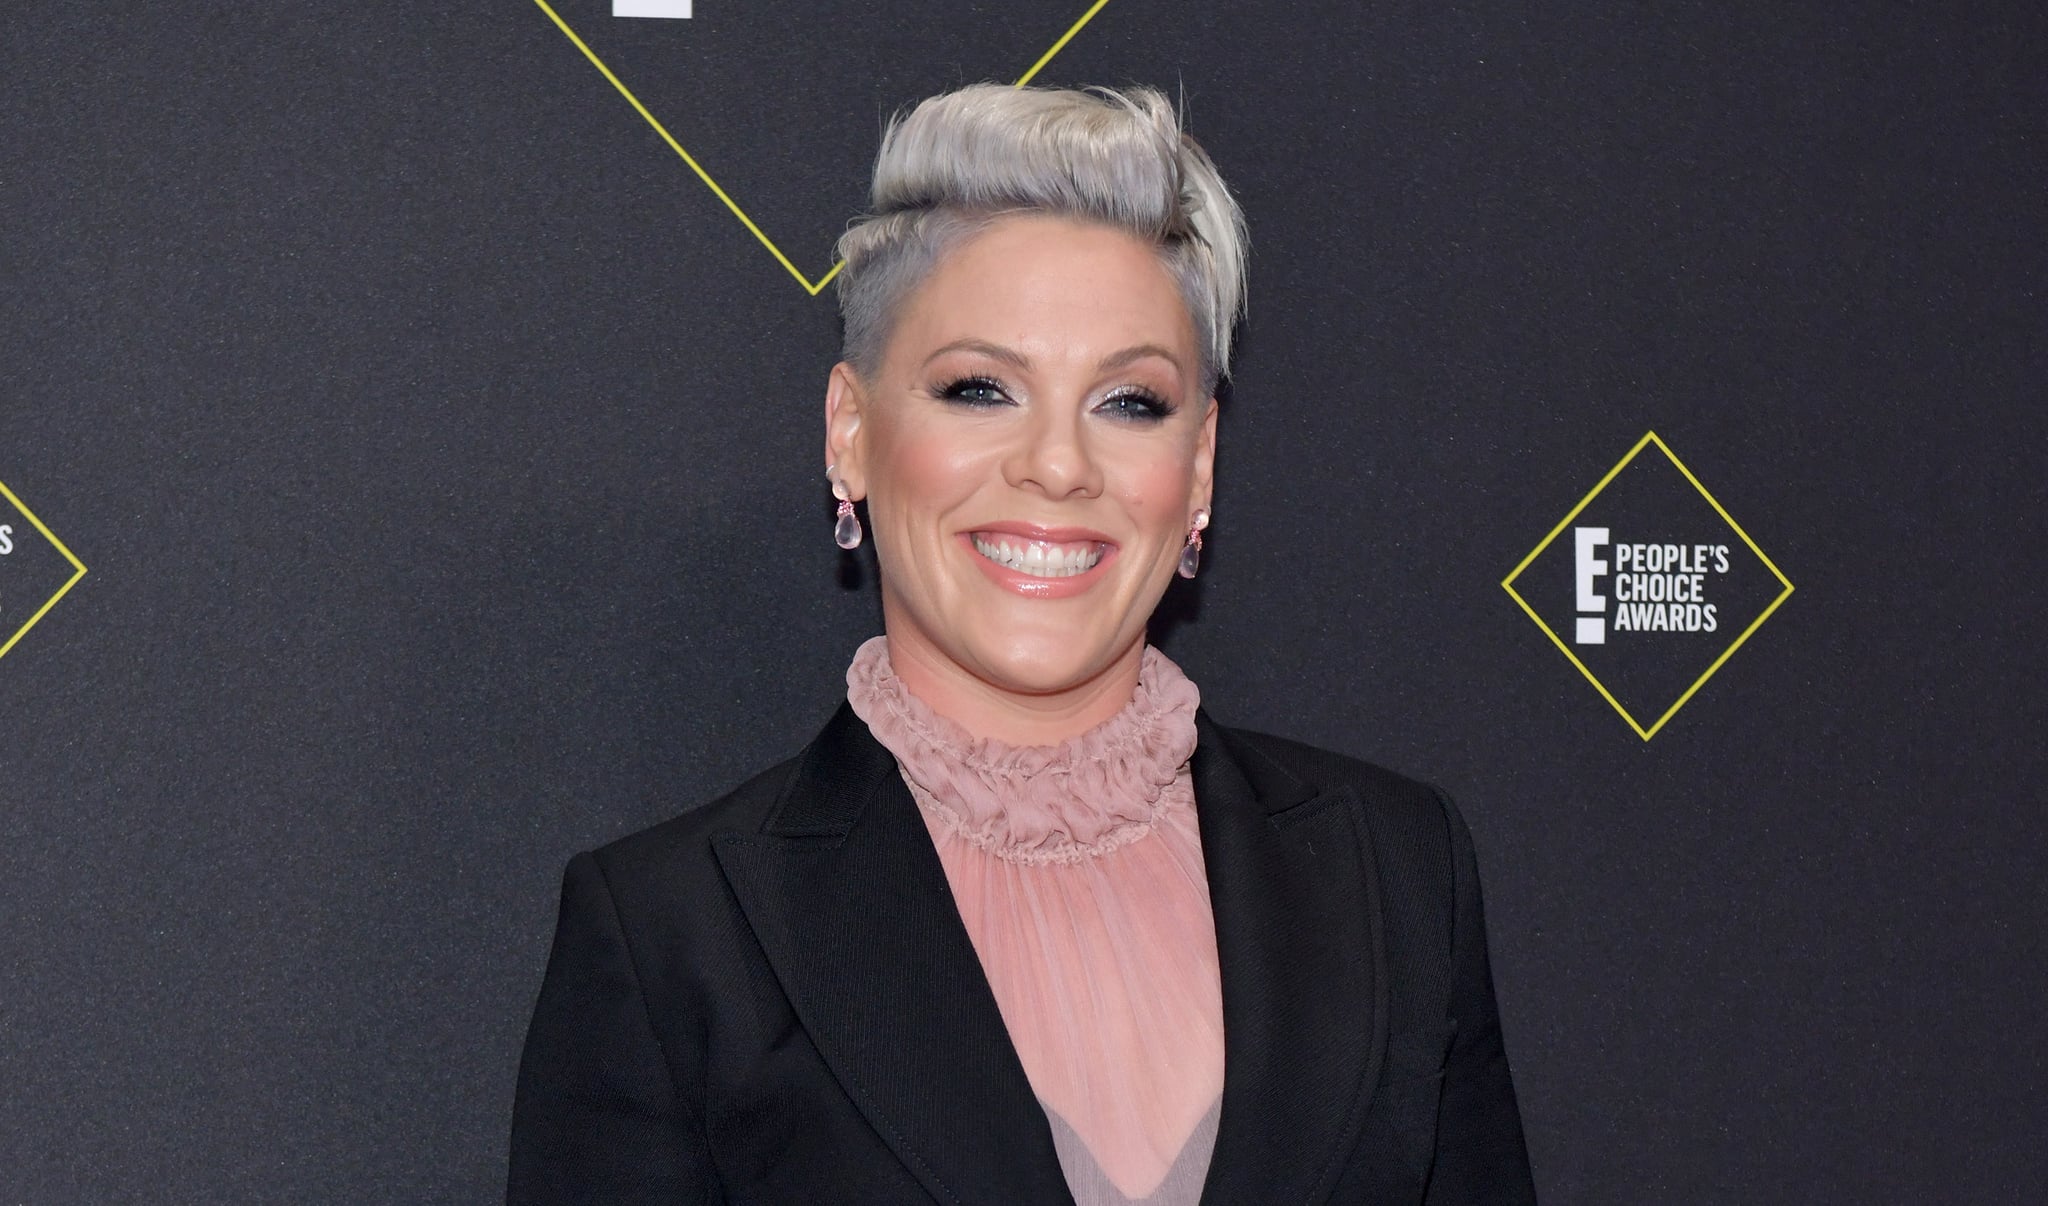 SANTA MONICA, CALIFORNIA - NOVEMBER 10: P!nk attends the 2019 E! People's Choice Awards at Barker Hangar on November 10, 2019 in Santa Monica, California. (Photo by Rodin Eckenroth/WireImage)